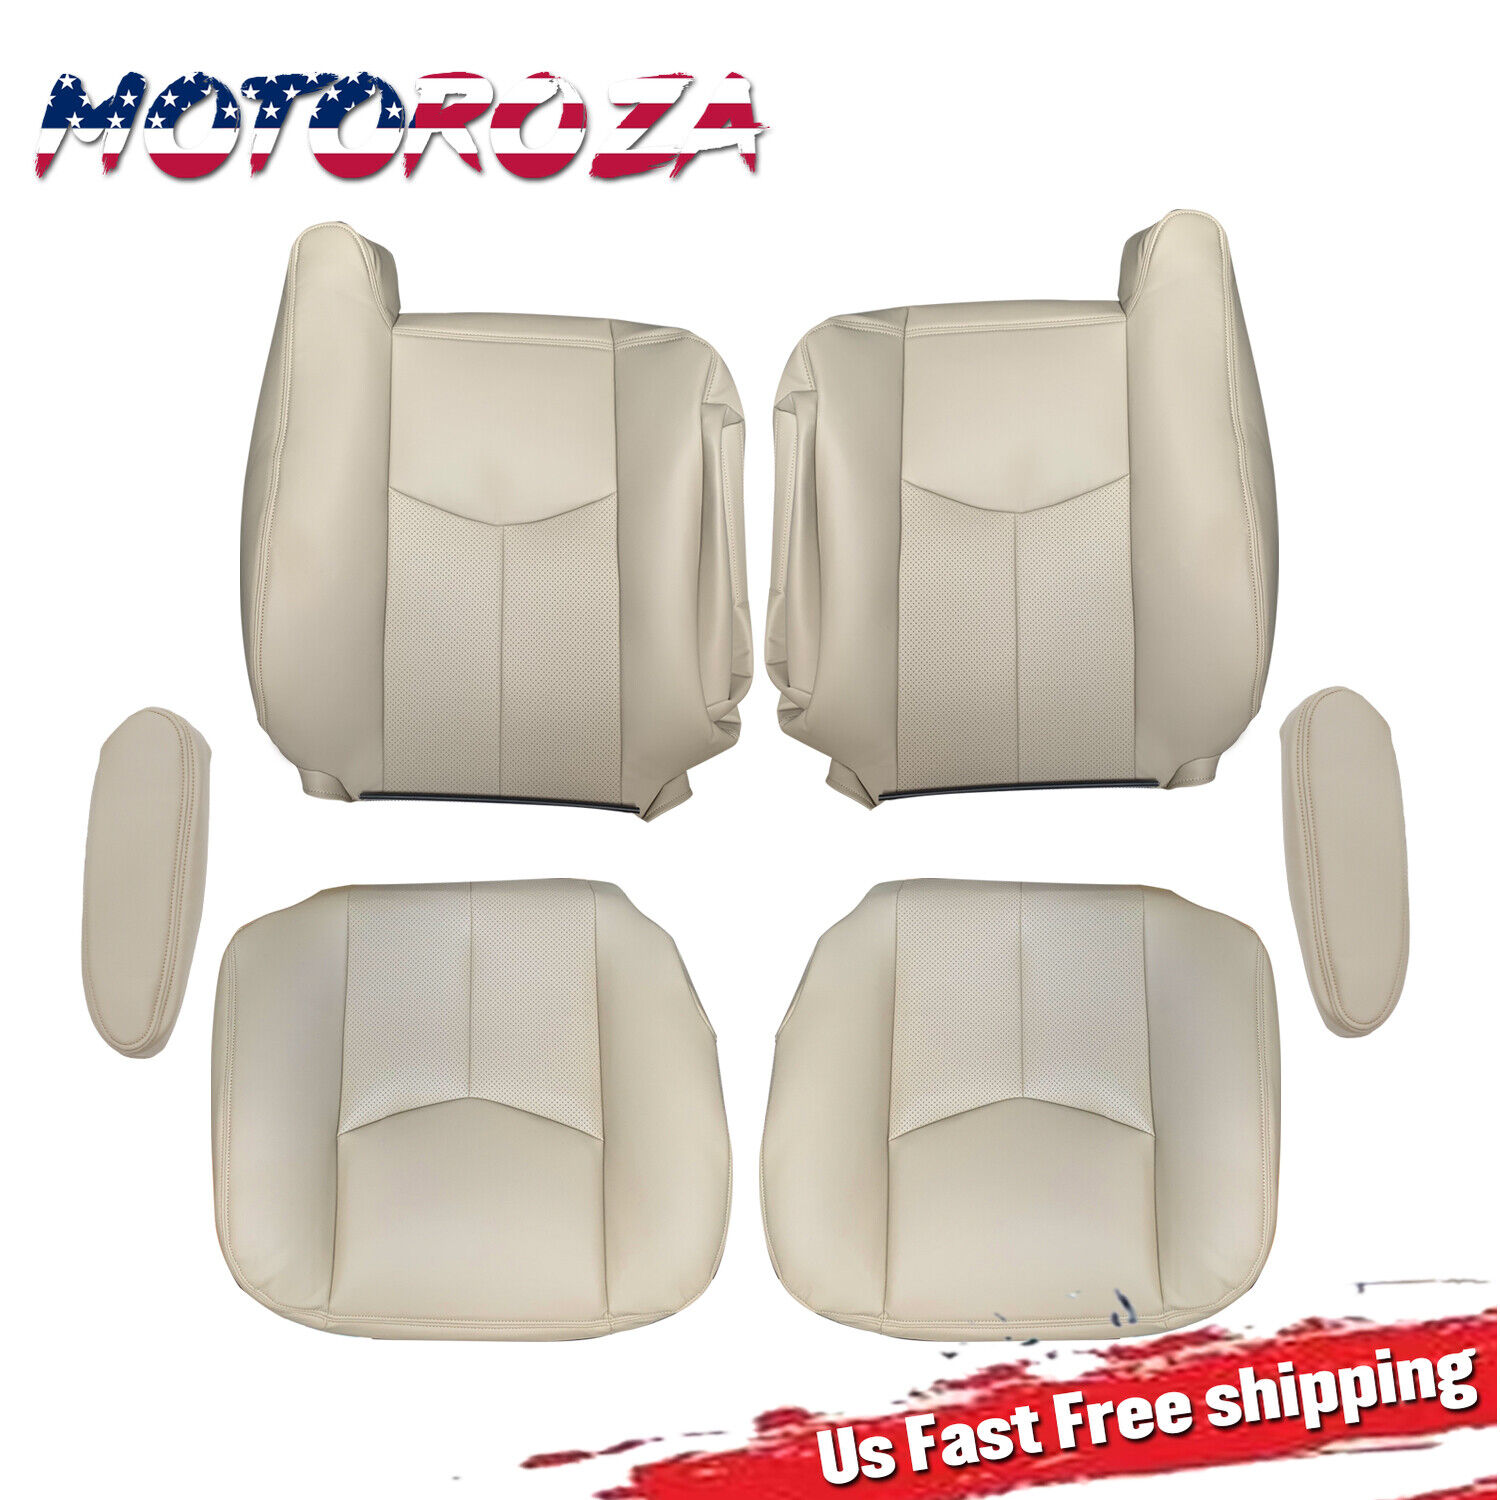 Fit For 2003-2006 Cadillac Escalade Front Leather Seat Cover & Armrest Cover Tan